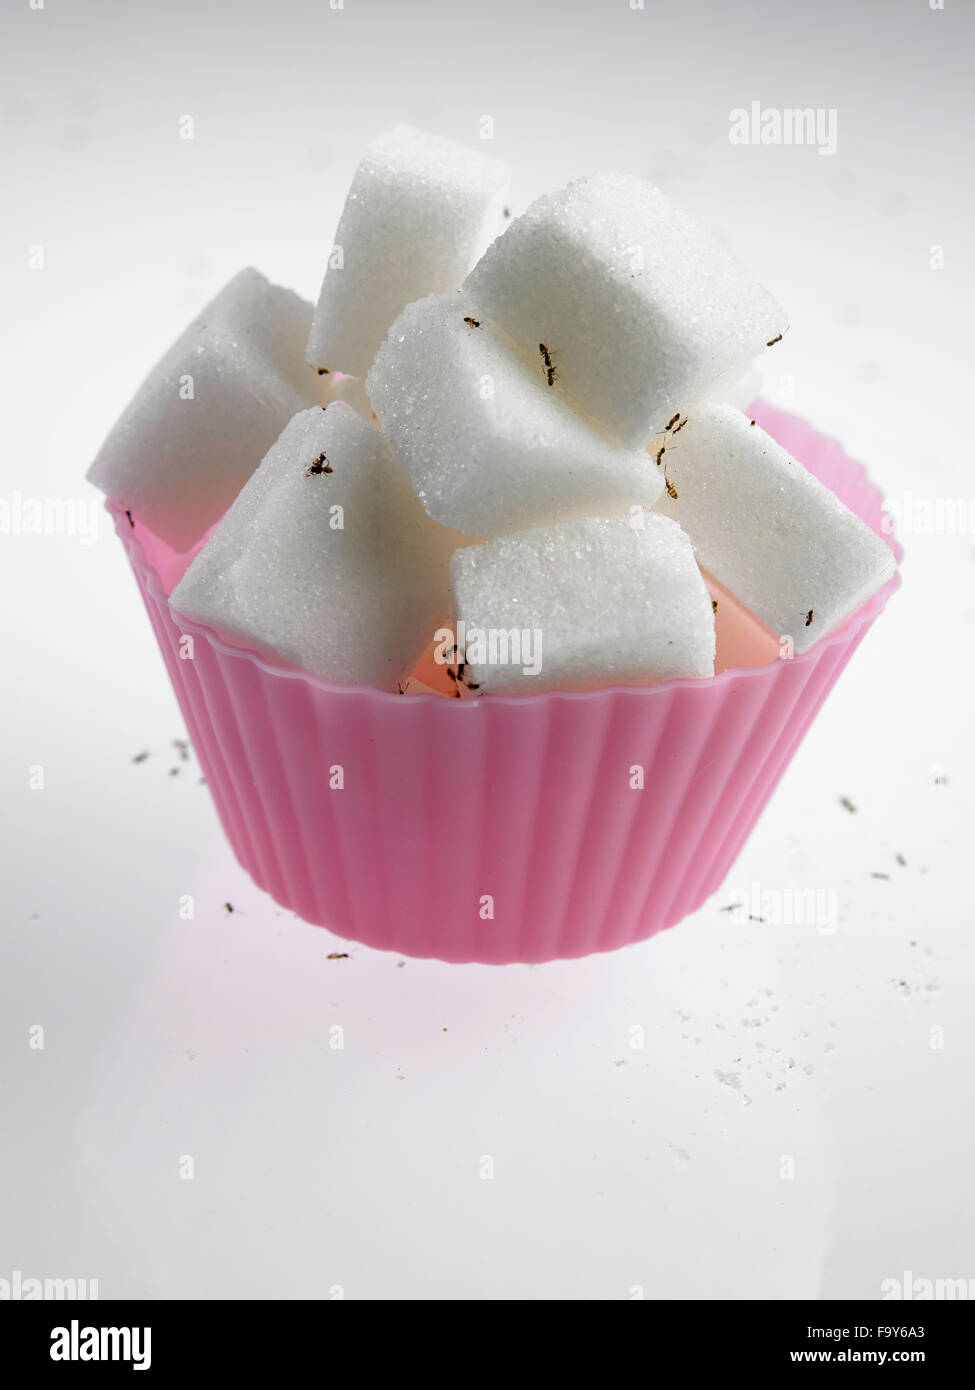 https://c8.alamy.com/comp/F9Y6A3/cube-sugar-in-cup-cake-mold-surrounded-with-ants-F9Y6A3.jpg